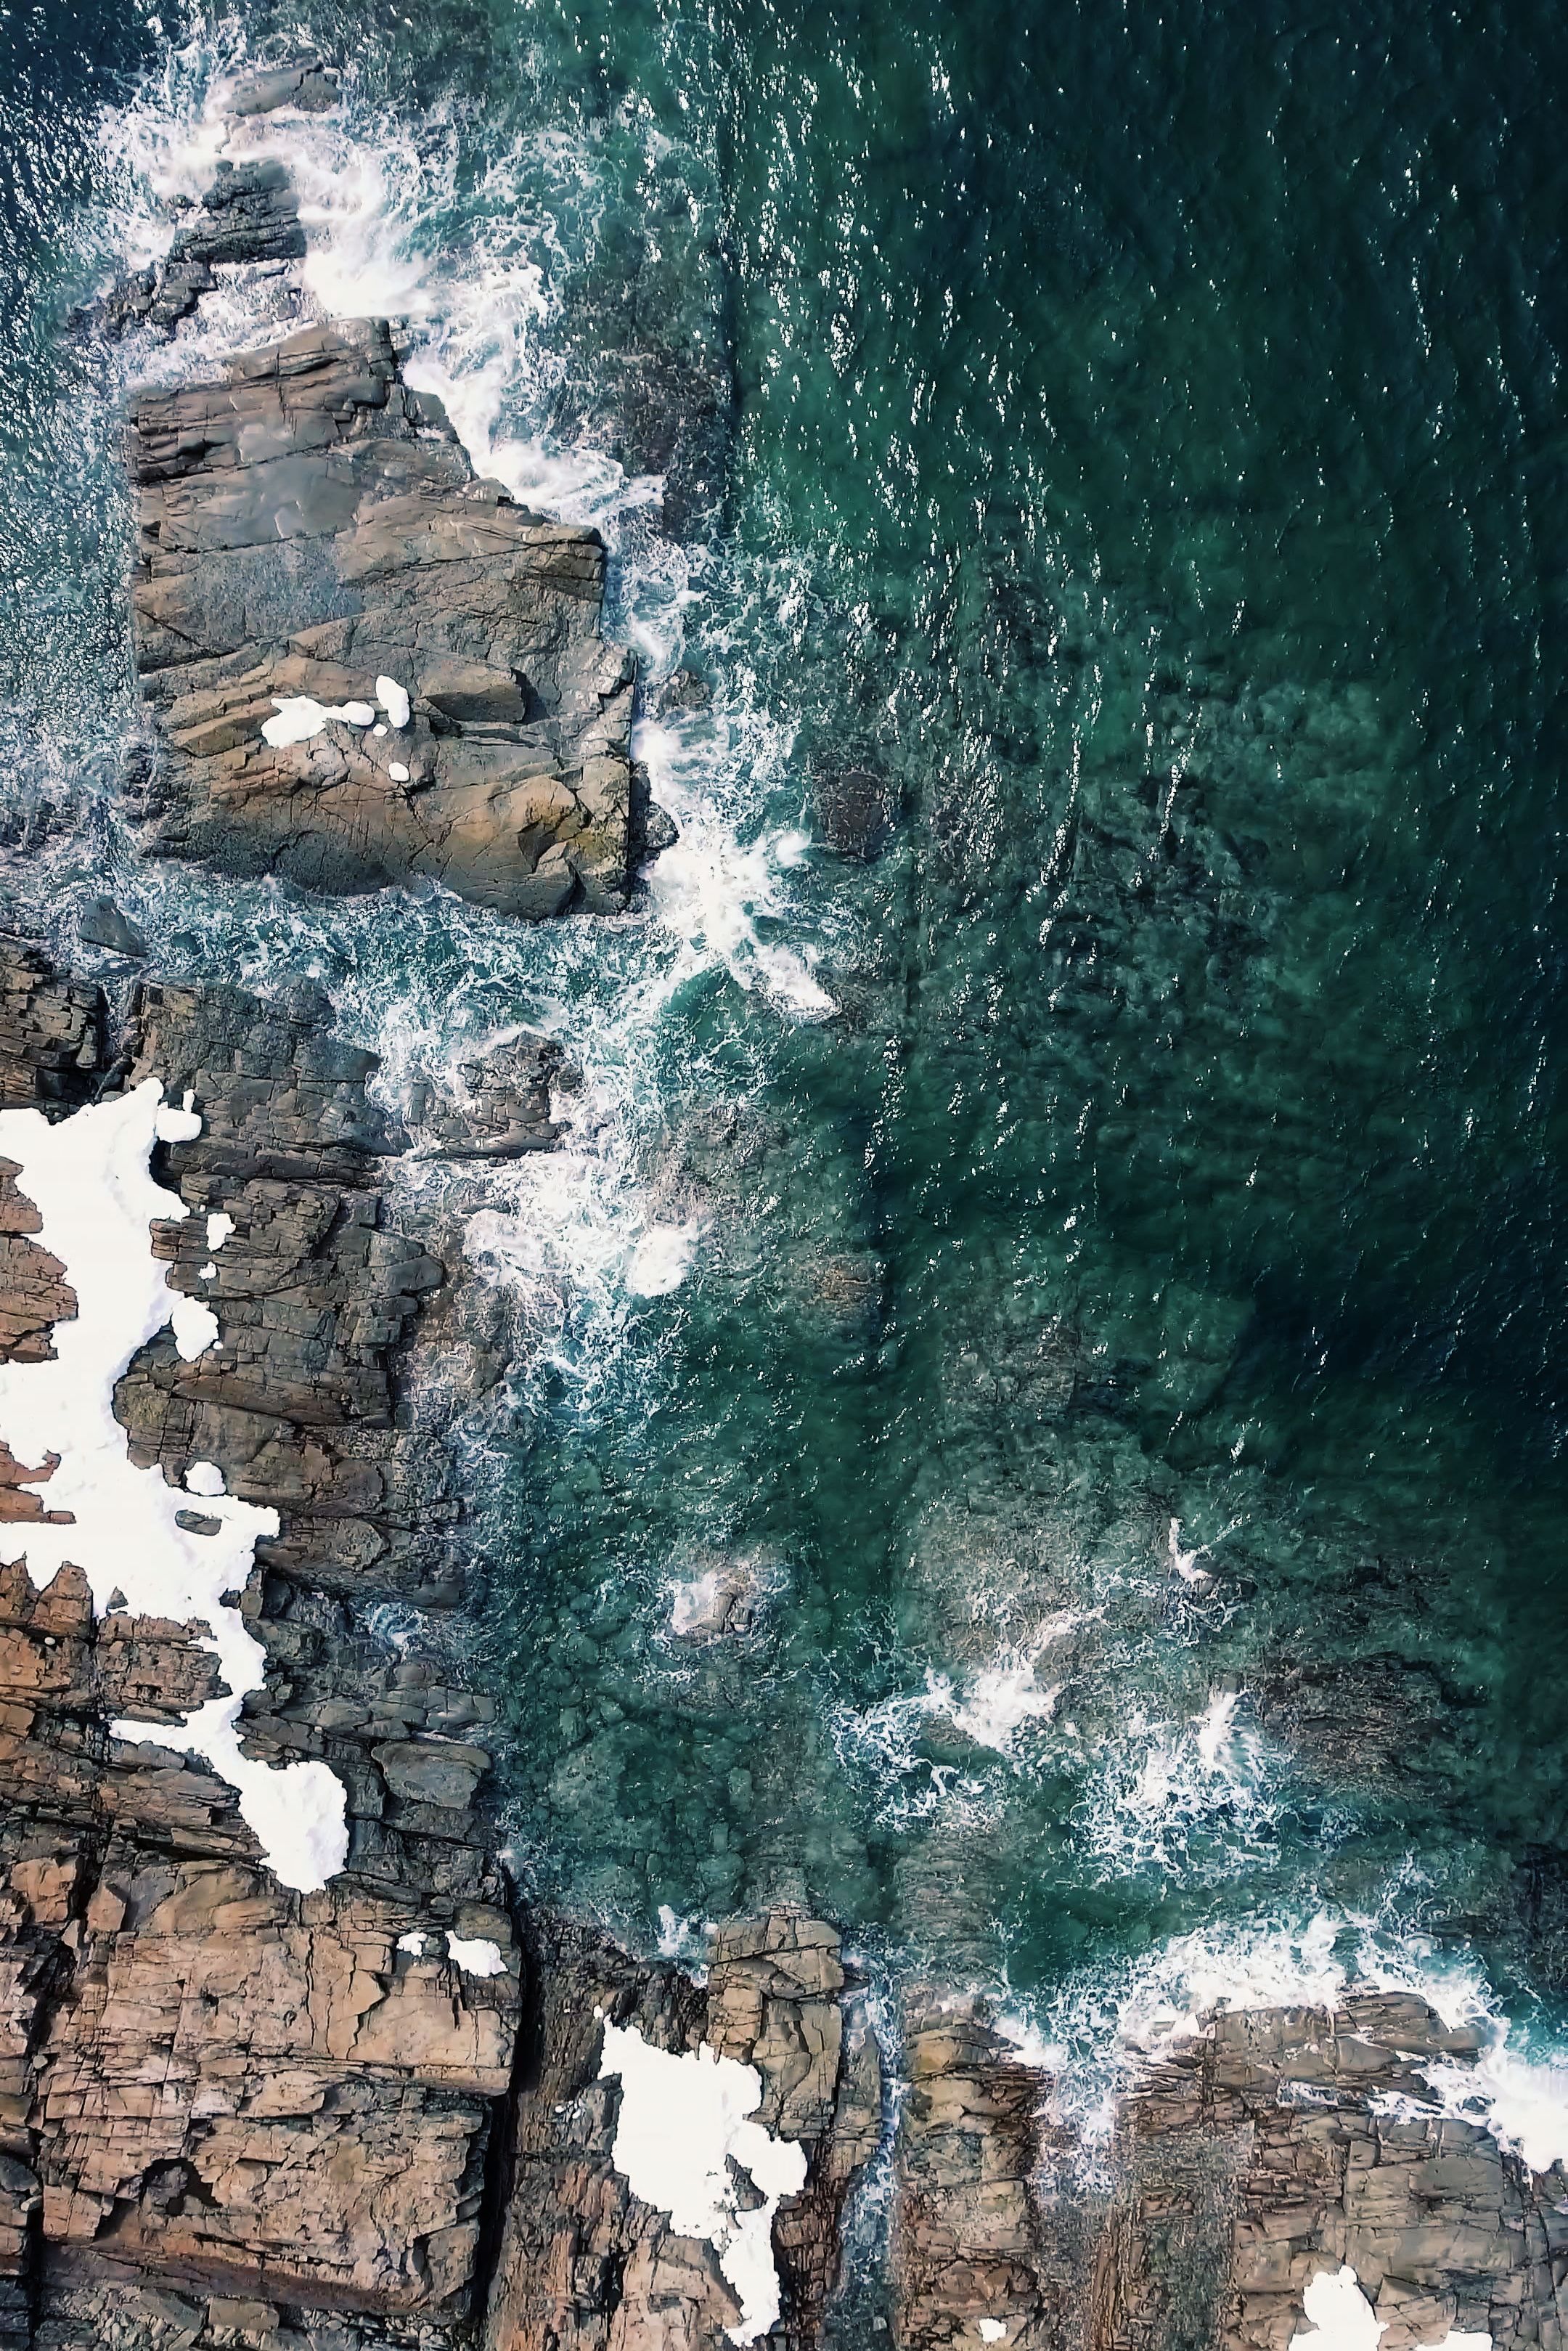 Shots of the Rocky shore from above. .. #dji #drone